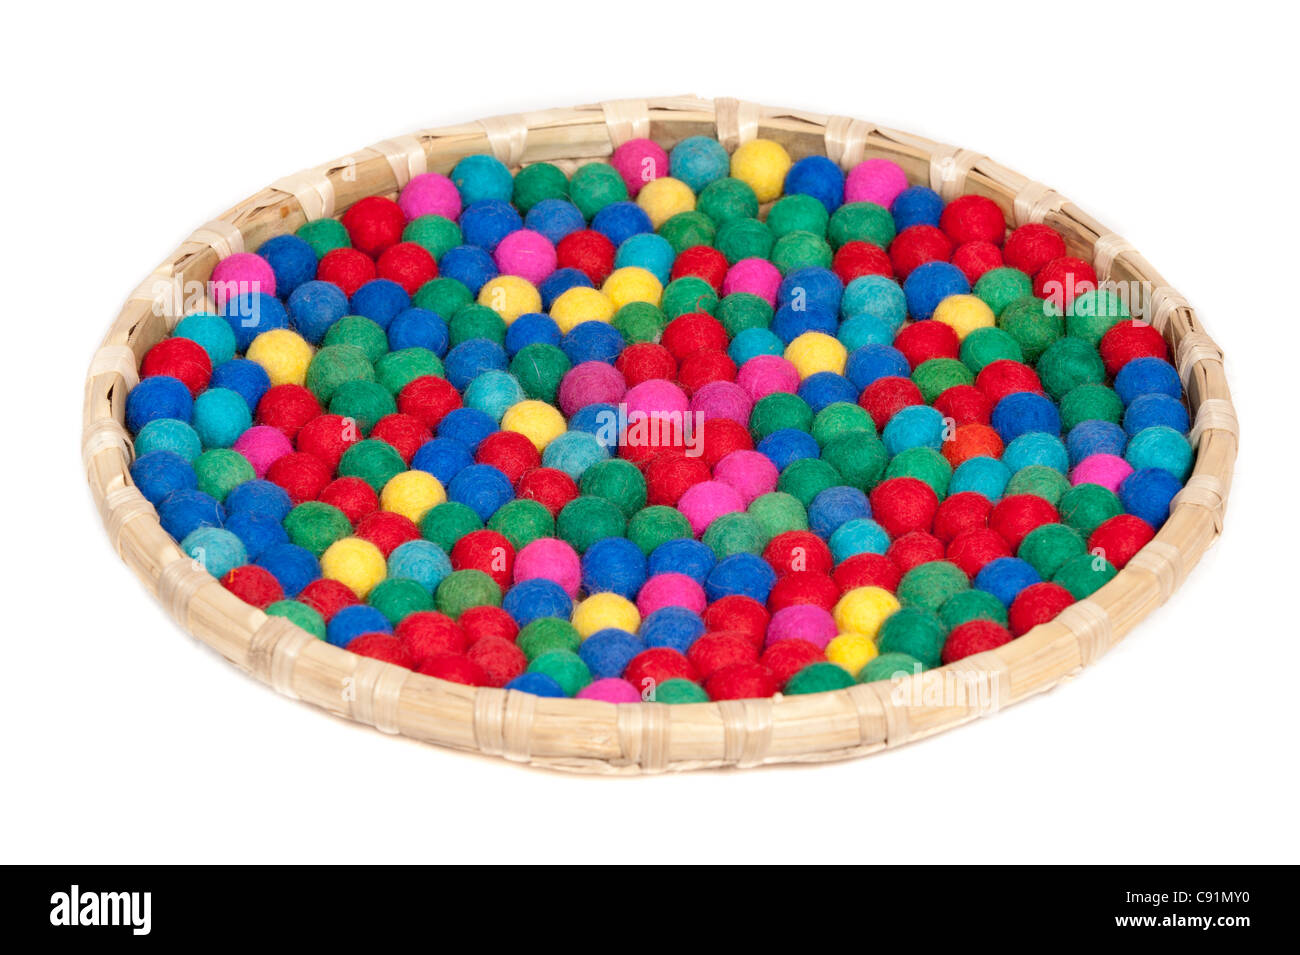 Colorful bobbles in tray Stock Photo